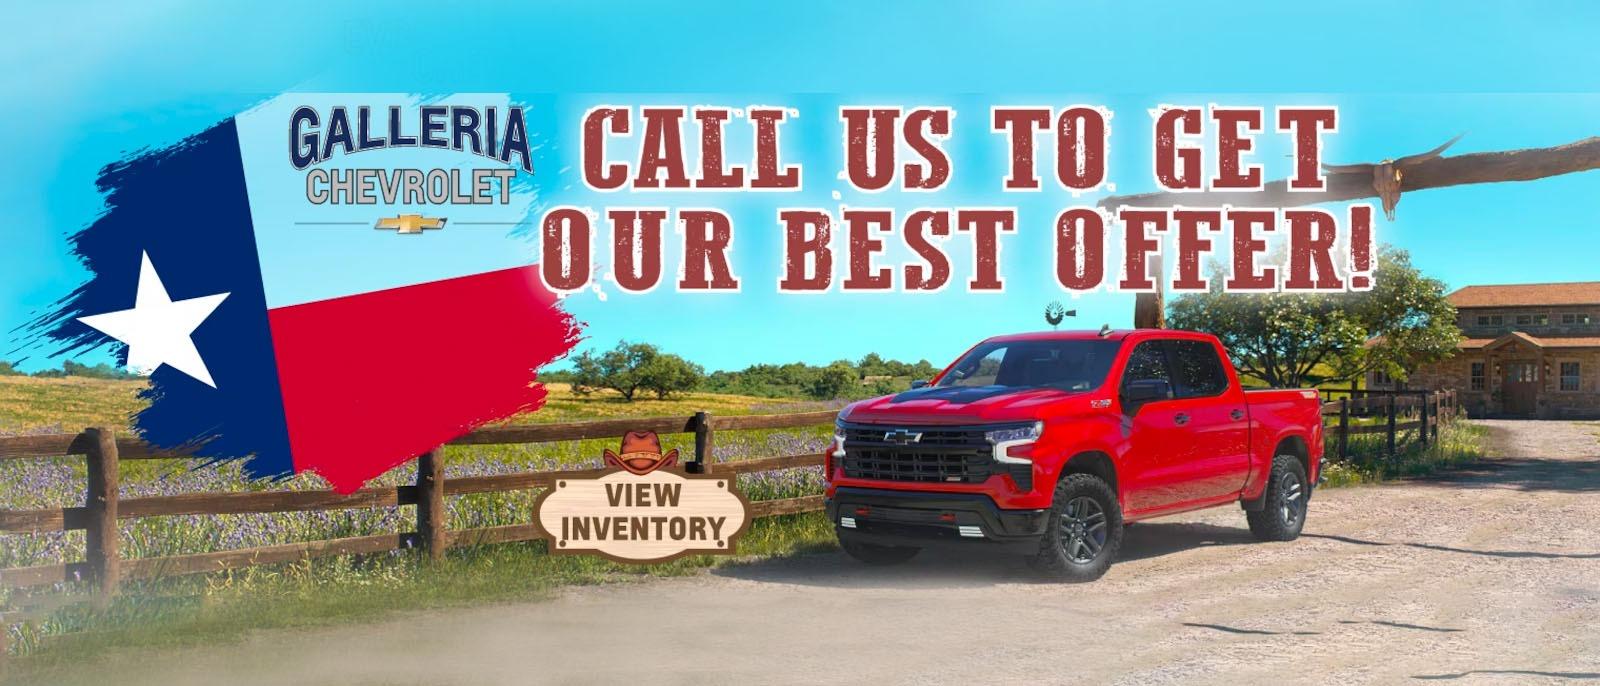 Call Us to get our Offer | View Inventory